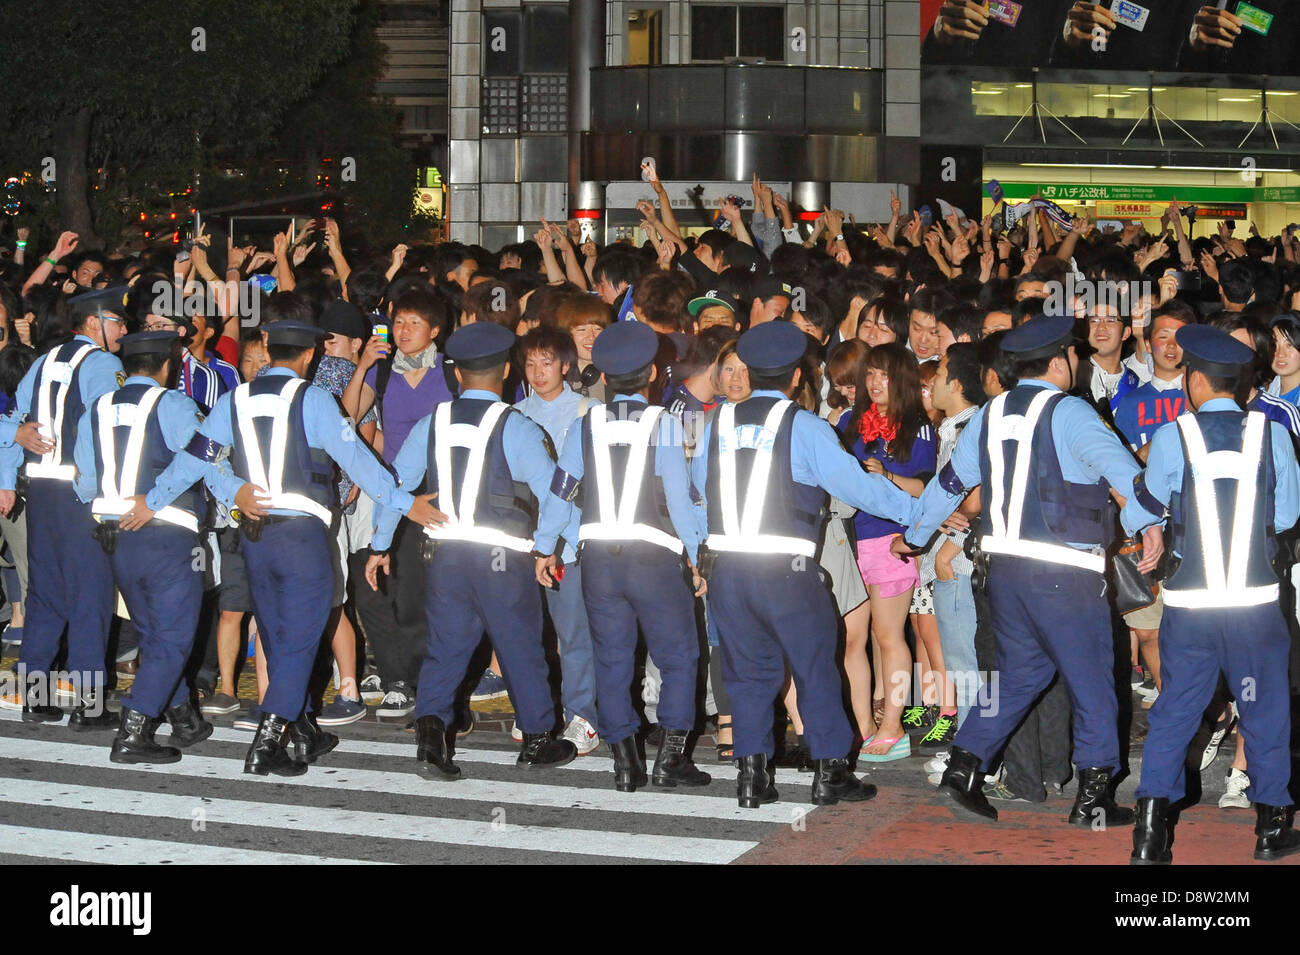 Saitama, Japan. 4th June 2013. June 4th, 2013 : Tokyo, Japan - Police Officers restricted pedestrians and celebrating fans of the Japan National Soccer team, which had a game of the final Asian qualifiers for the 2014 World Cup against Australia and cleared it, in front of Shibuya Station, Shibuya, Tokyo Japan on June 4, 2013.  (Photo by Koichiro Suzuki/AFLO/Alamy Live News) Stock Photo